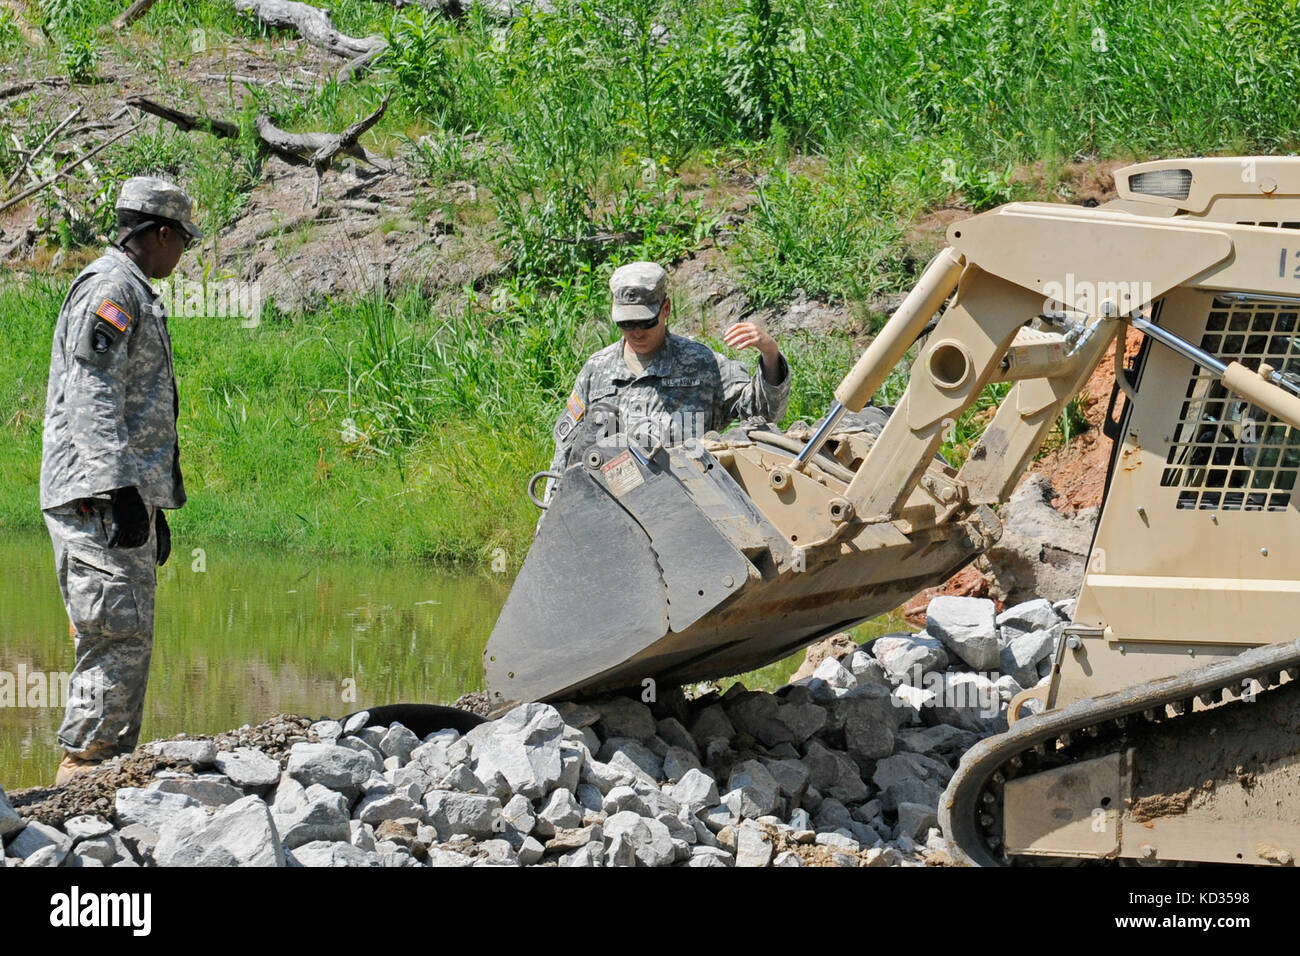 Soldiers of the 122nd Engineer Battalion work on several projects as part of their 2015 annual training exercise at the Savannah River Site near Aiken, S.C., July 22, 2015.  The exercise was the result of a joint project between the South Carolina National Guard and the Savannah River Site that provided civil-works training opportunities for the soldiers and needed infrastructure improvements for the site.  The exercise ran July 8 – July 25. (U.S. Army National Guard photo by Sgt. Kevin Pickering/Released) Stock Photo